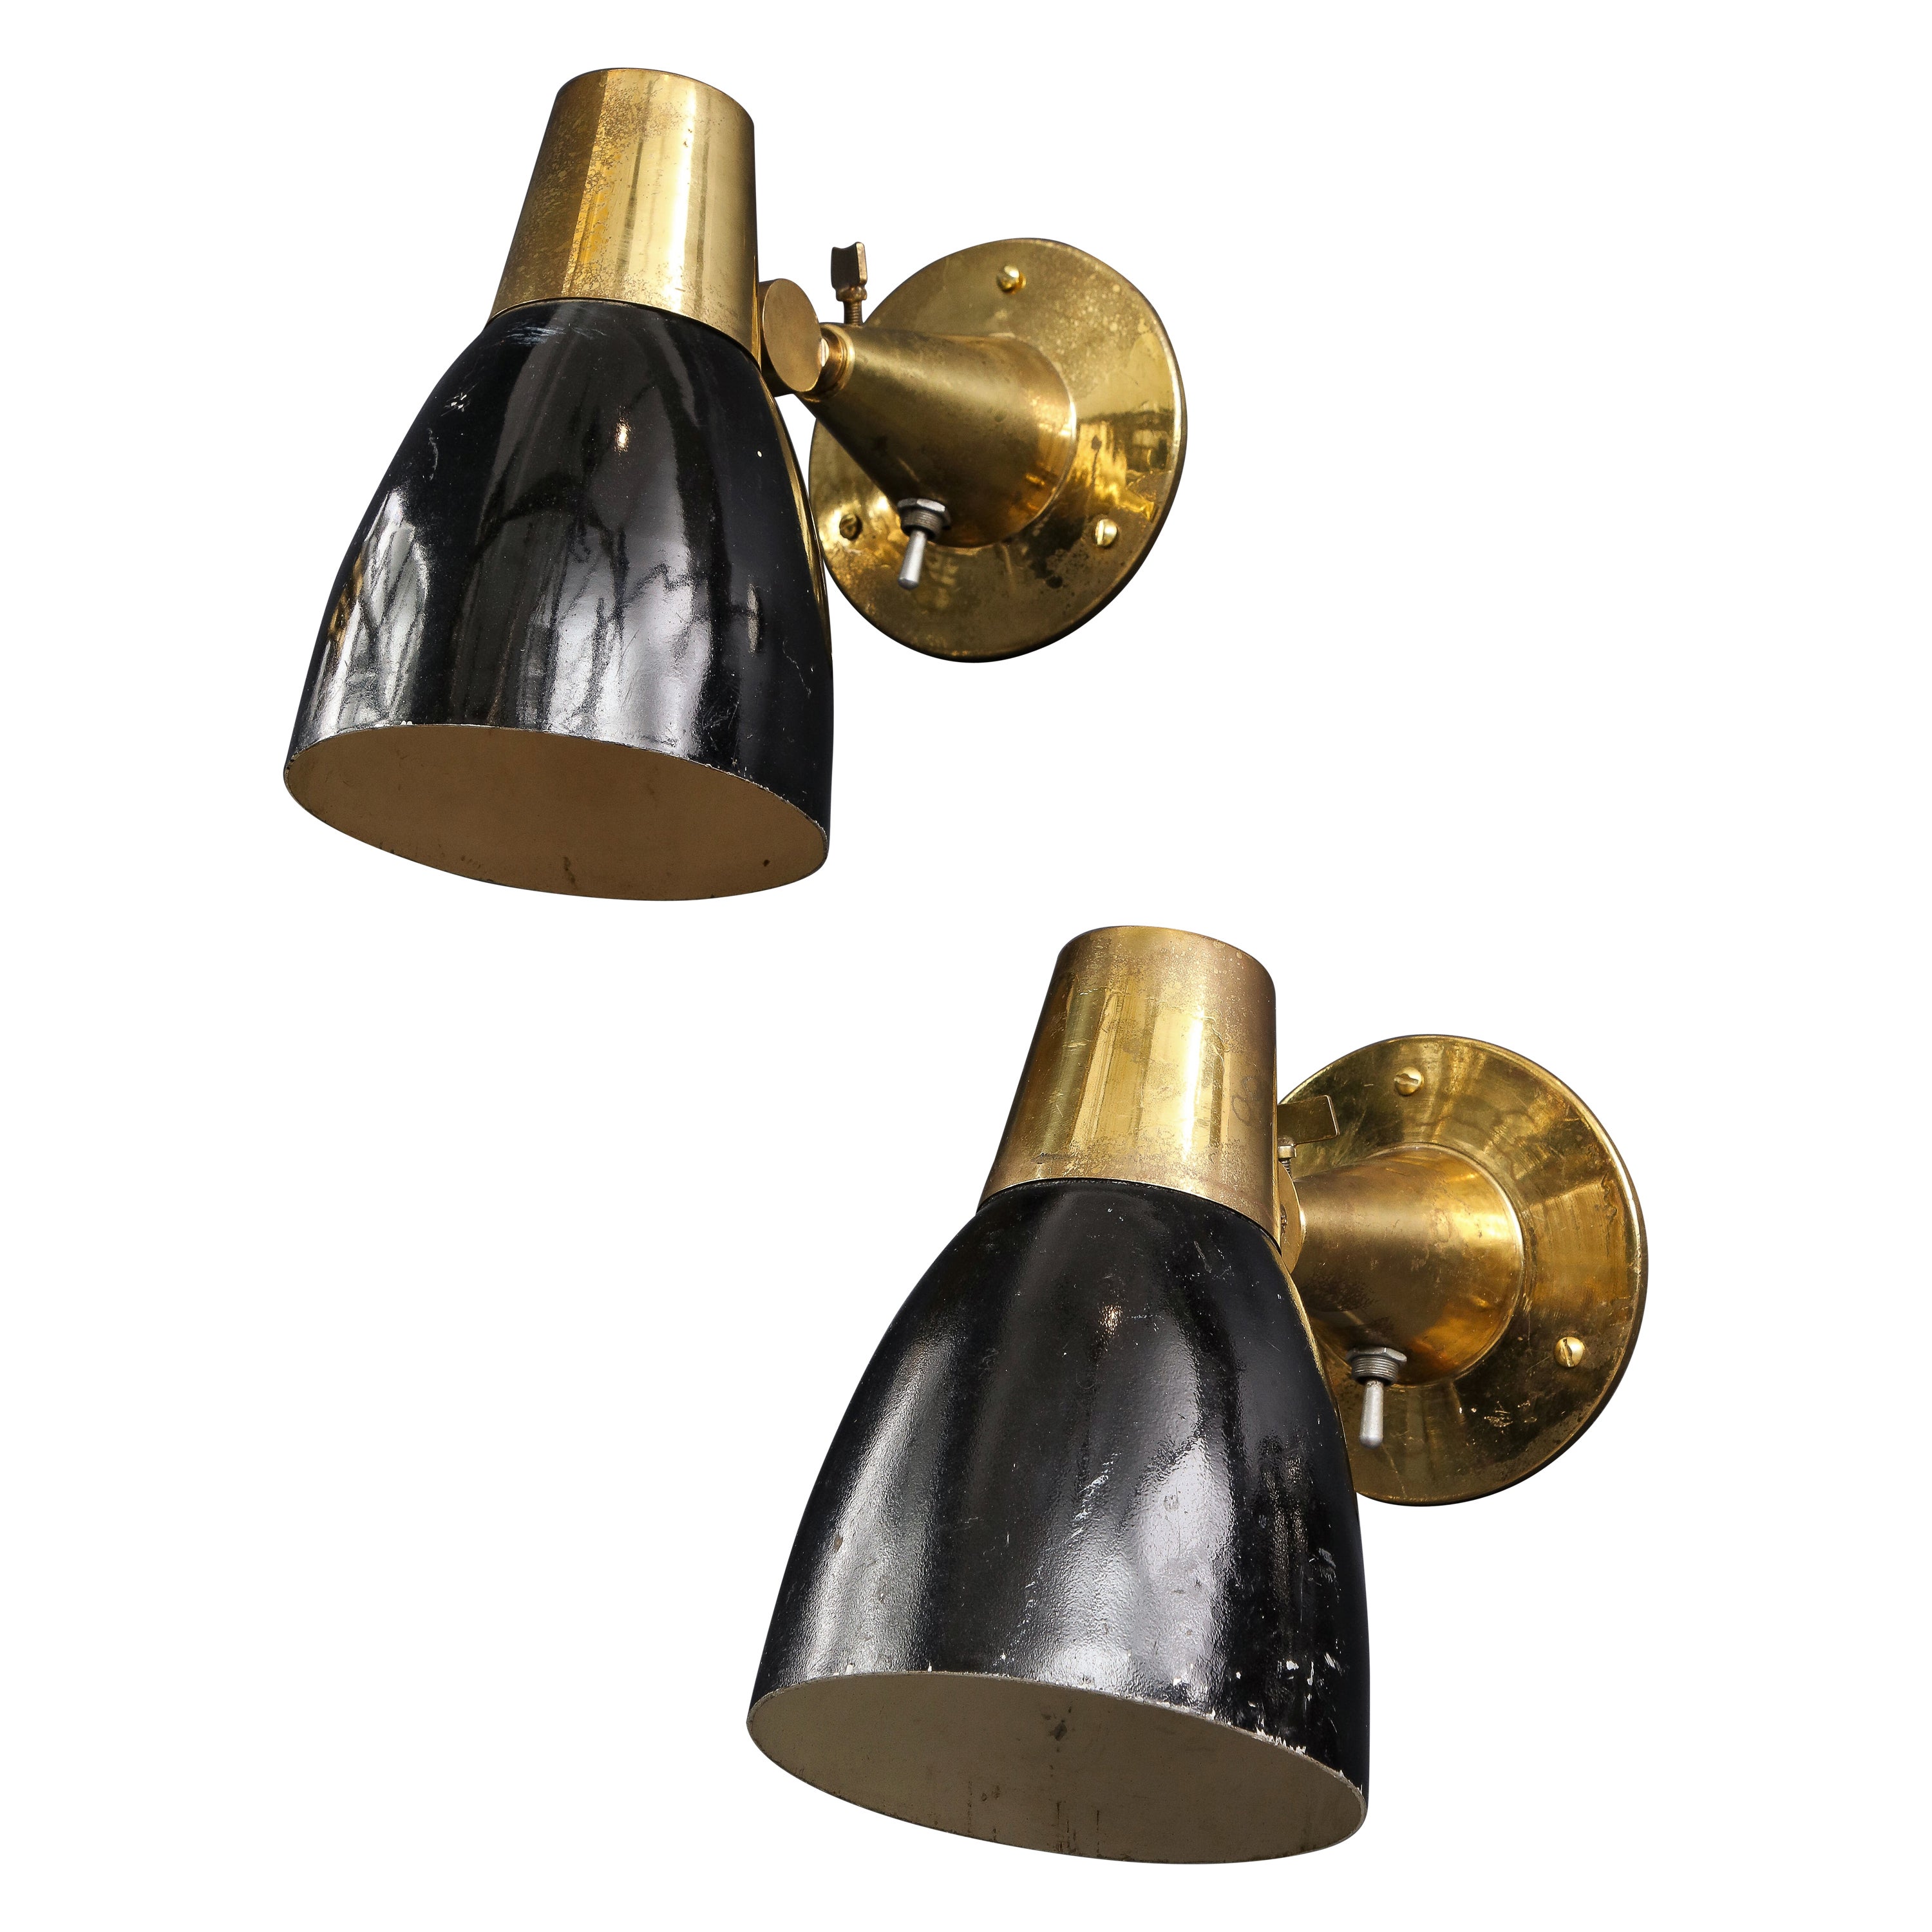 Pair of Midcentury Italian Brass and Enameled Steel Sconces, 1950s For Sale